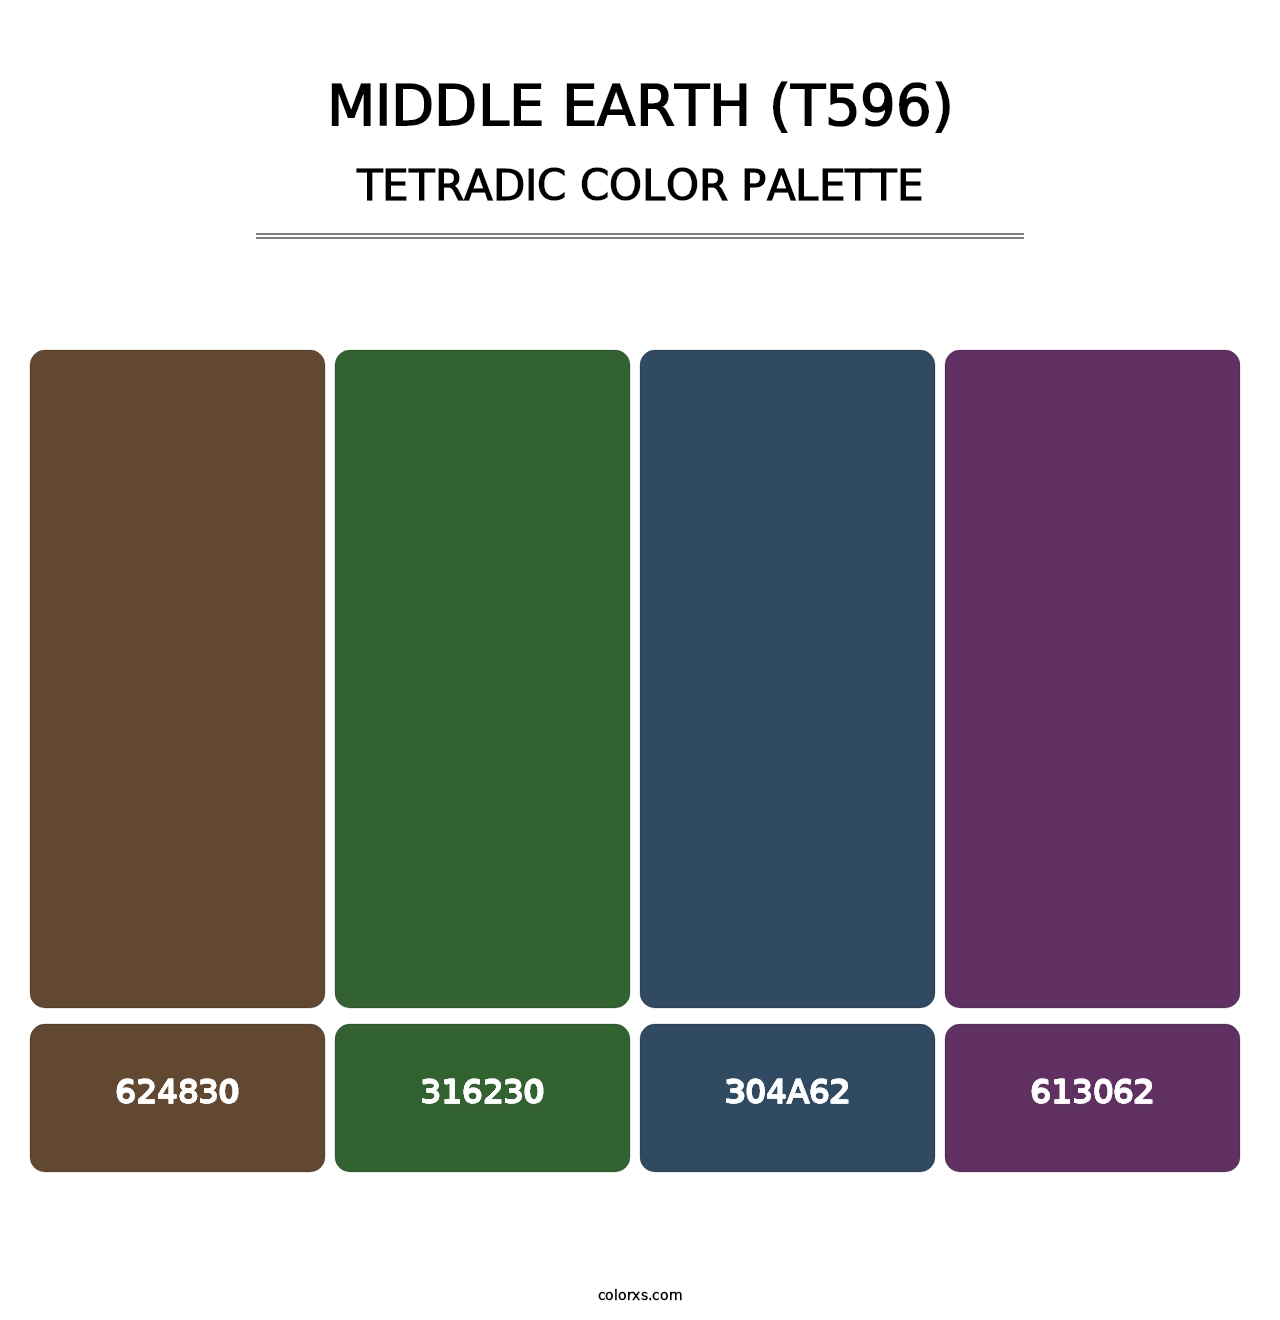 Middle Earth (T596) - Tetradic Color Palette